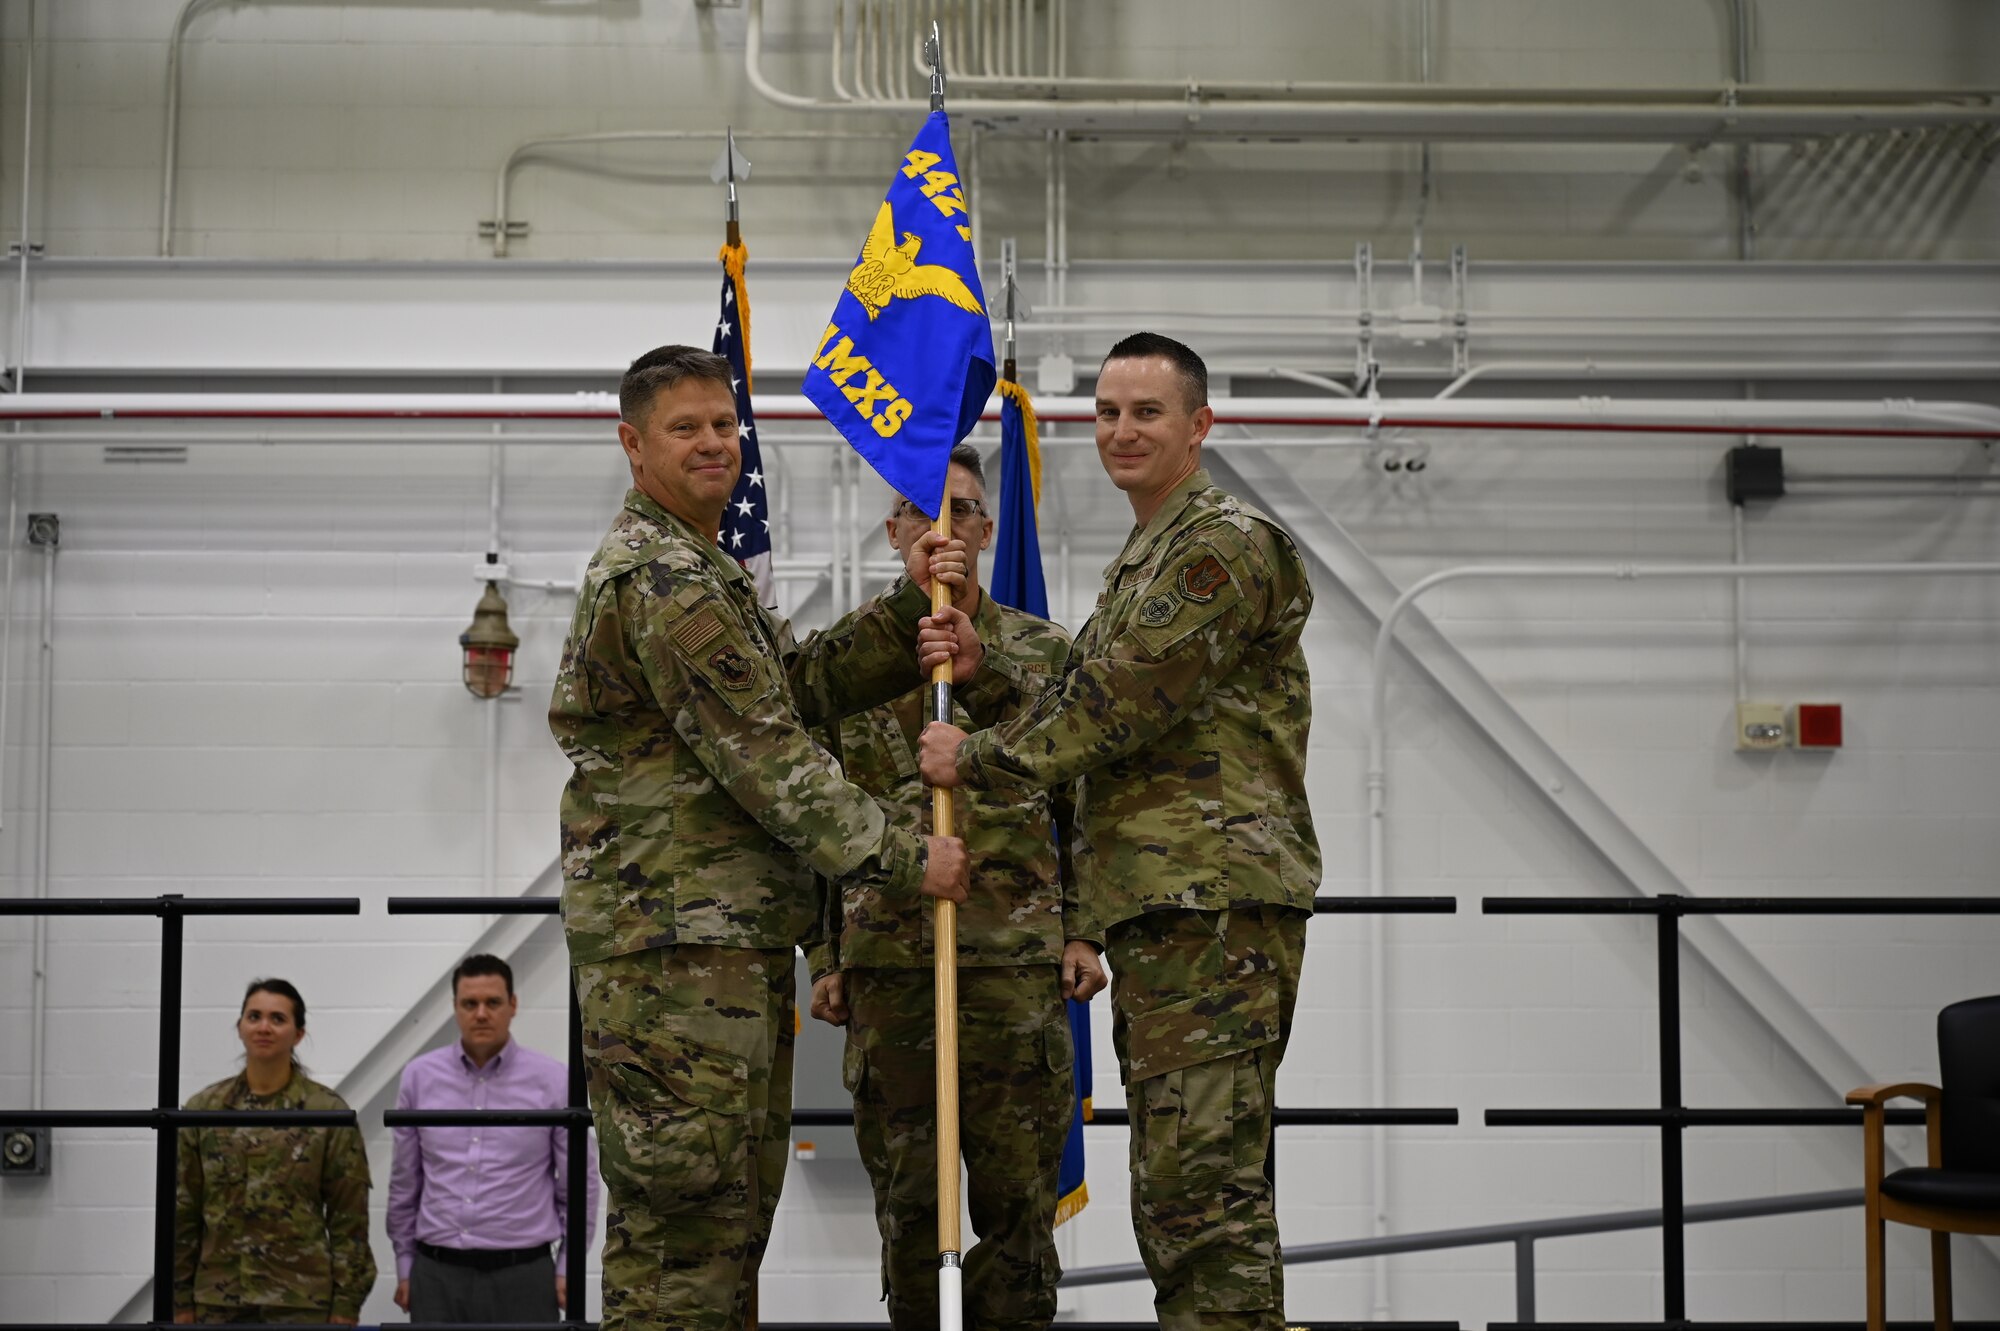 Lt. Col. William McLeod hands the 442 AMXS guidon to Maj. John Goodwin III while Erik stands at attention in civilian clothes in the background.